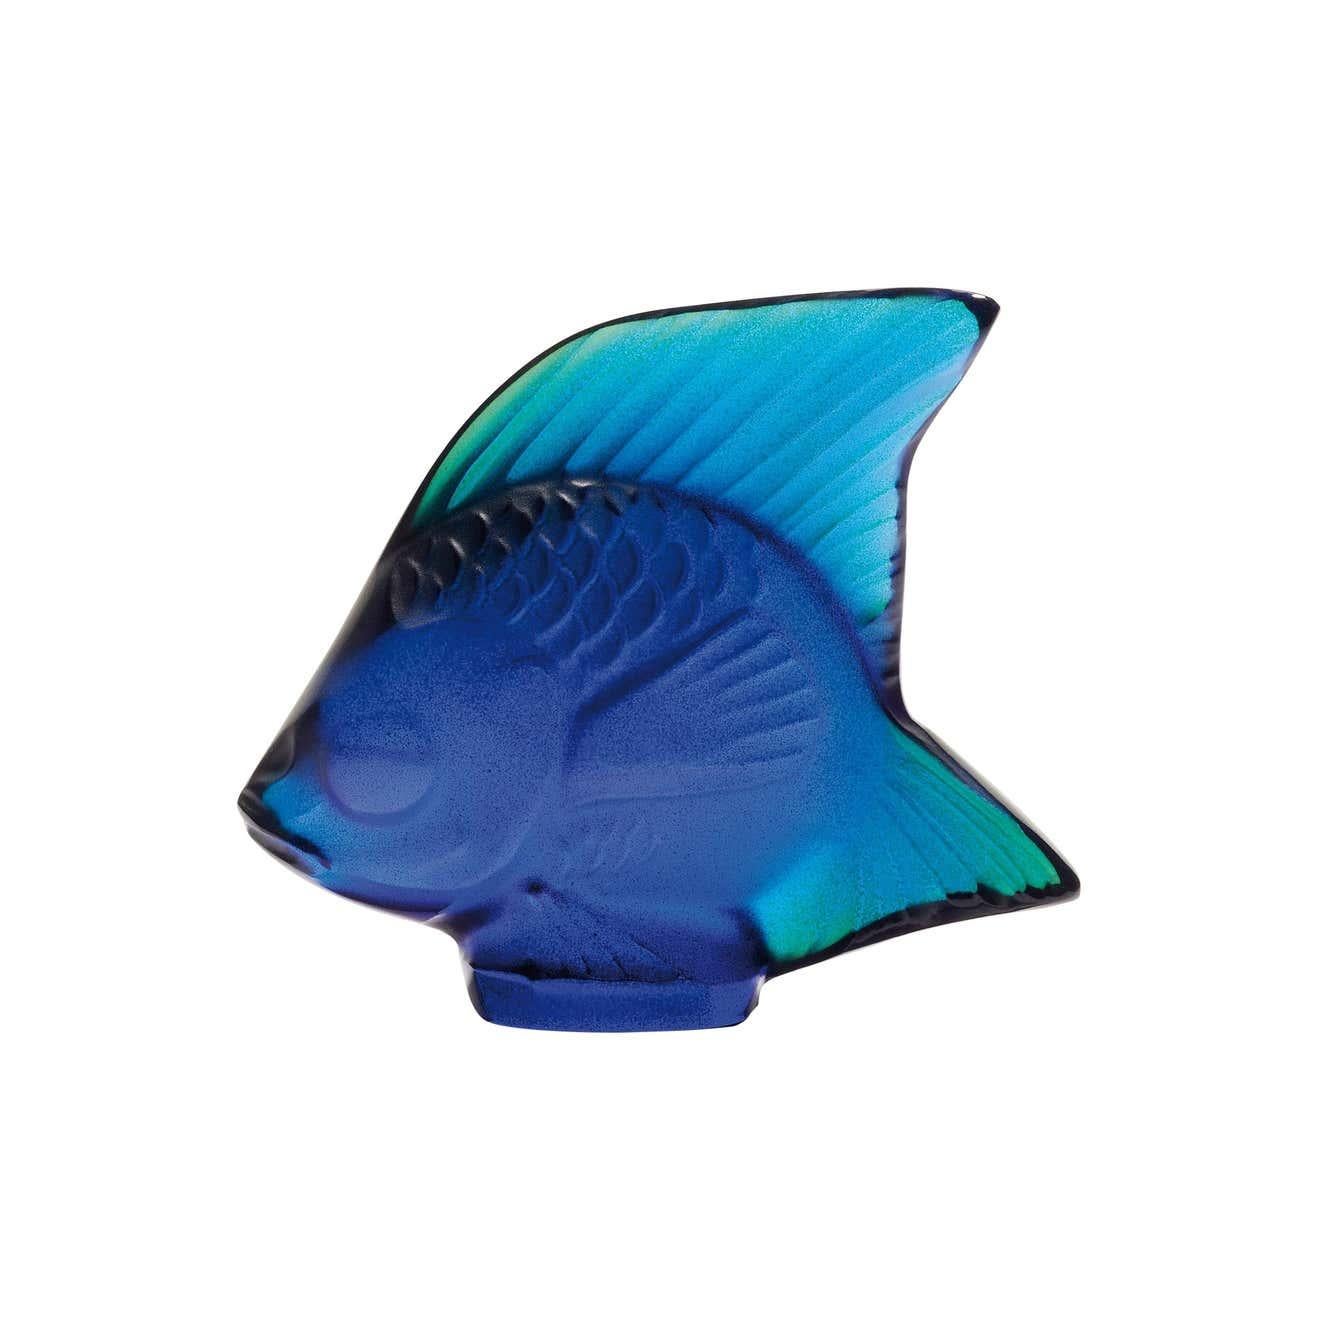 2 Lalique Fish Sculpture Cap Ferrat Blue Luster Crystal, 1 Lalique Fish Sculpture Opalescent Crystal, 1 Lalique Fish Sculpture Black Crystal

The original fish in glass was designed in 1913 by René Lalique and has since become an important and